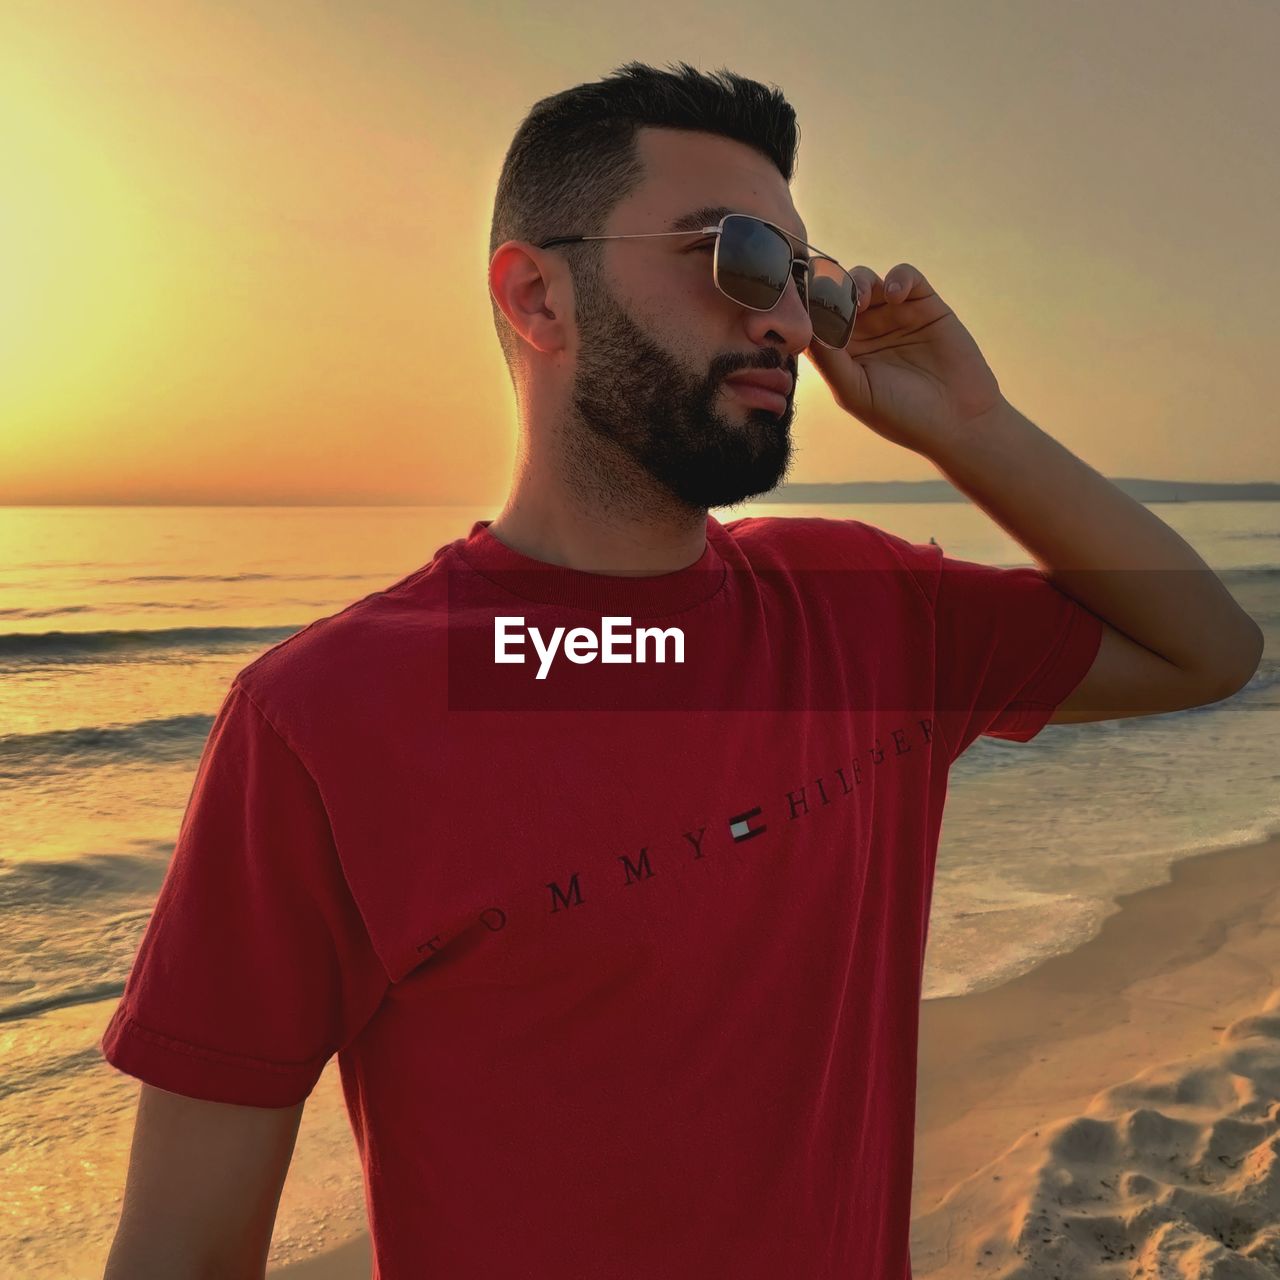 sea, water, beach, one person, sunset, red, land, sky, adult, nature, young adult, waist up, men, leisure activity, standing, fashion, sand, vacation, glasses, holiday, sunglasses, casual clothing, beard, sunlight, trip, person, summer, lifestyles, beauty in nature, facial hair, horizon, relaxation, sun, horizon over water, looking, scenics - nature, t-shirt, outdoors, clothing, holding, travel destinations, portrait, travel, orange color